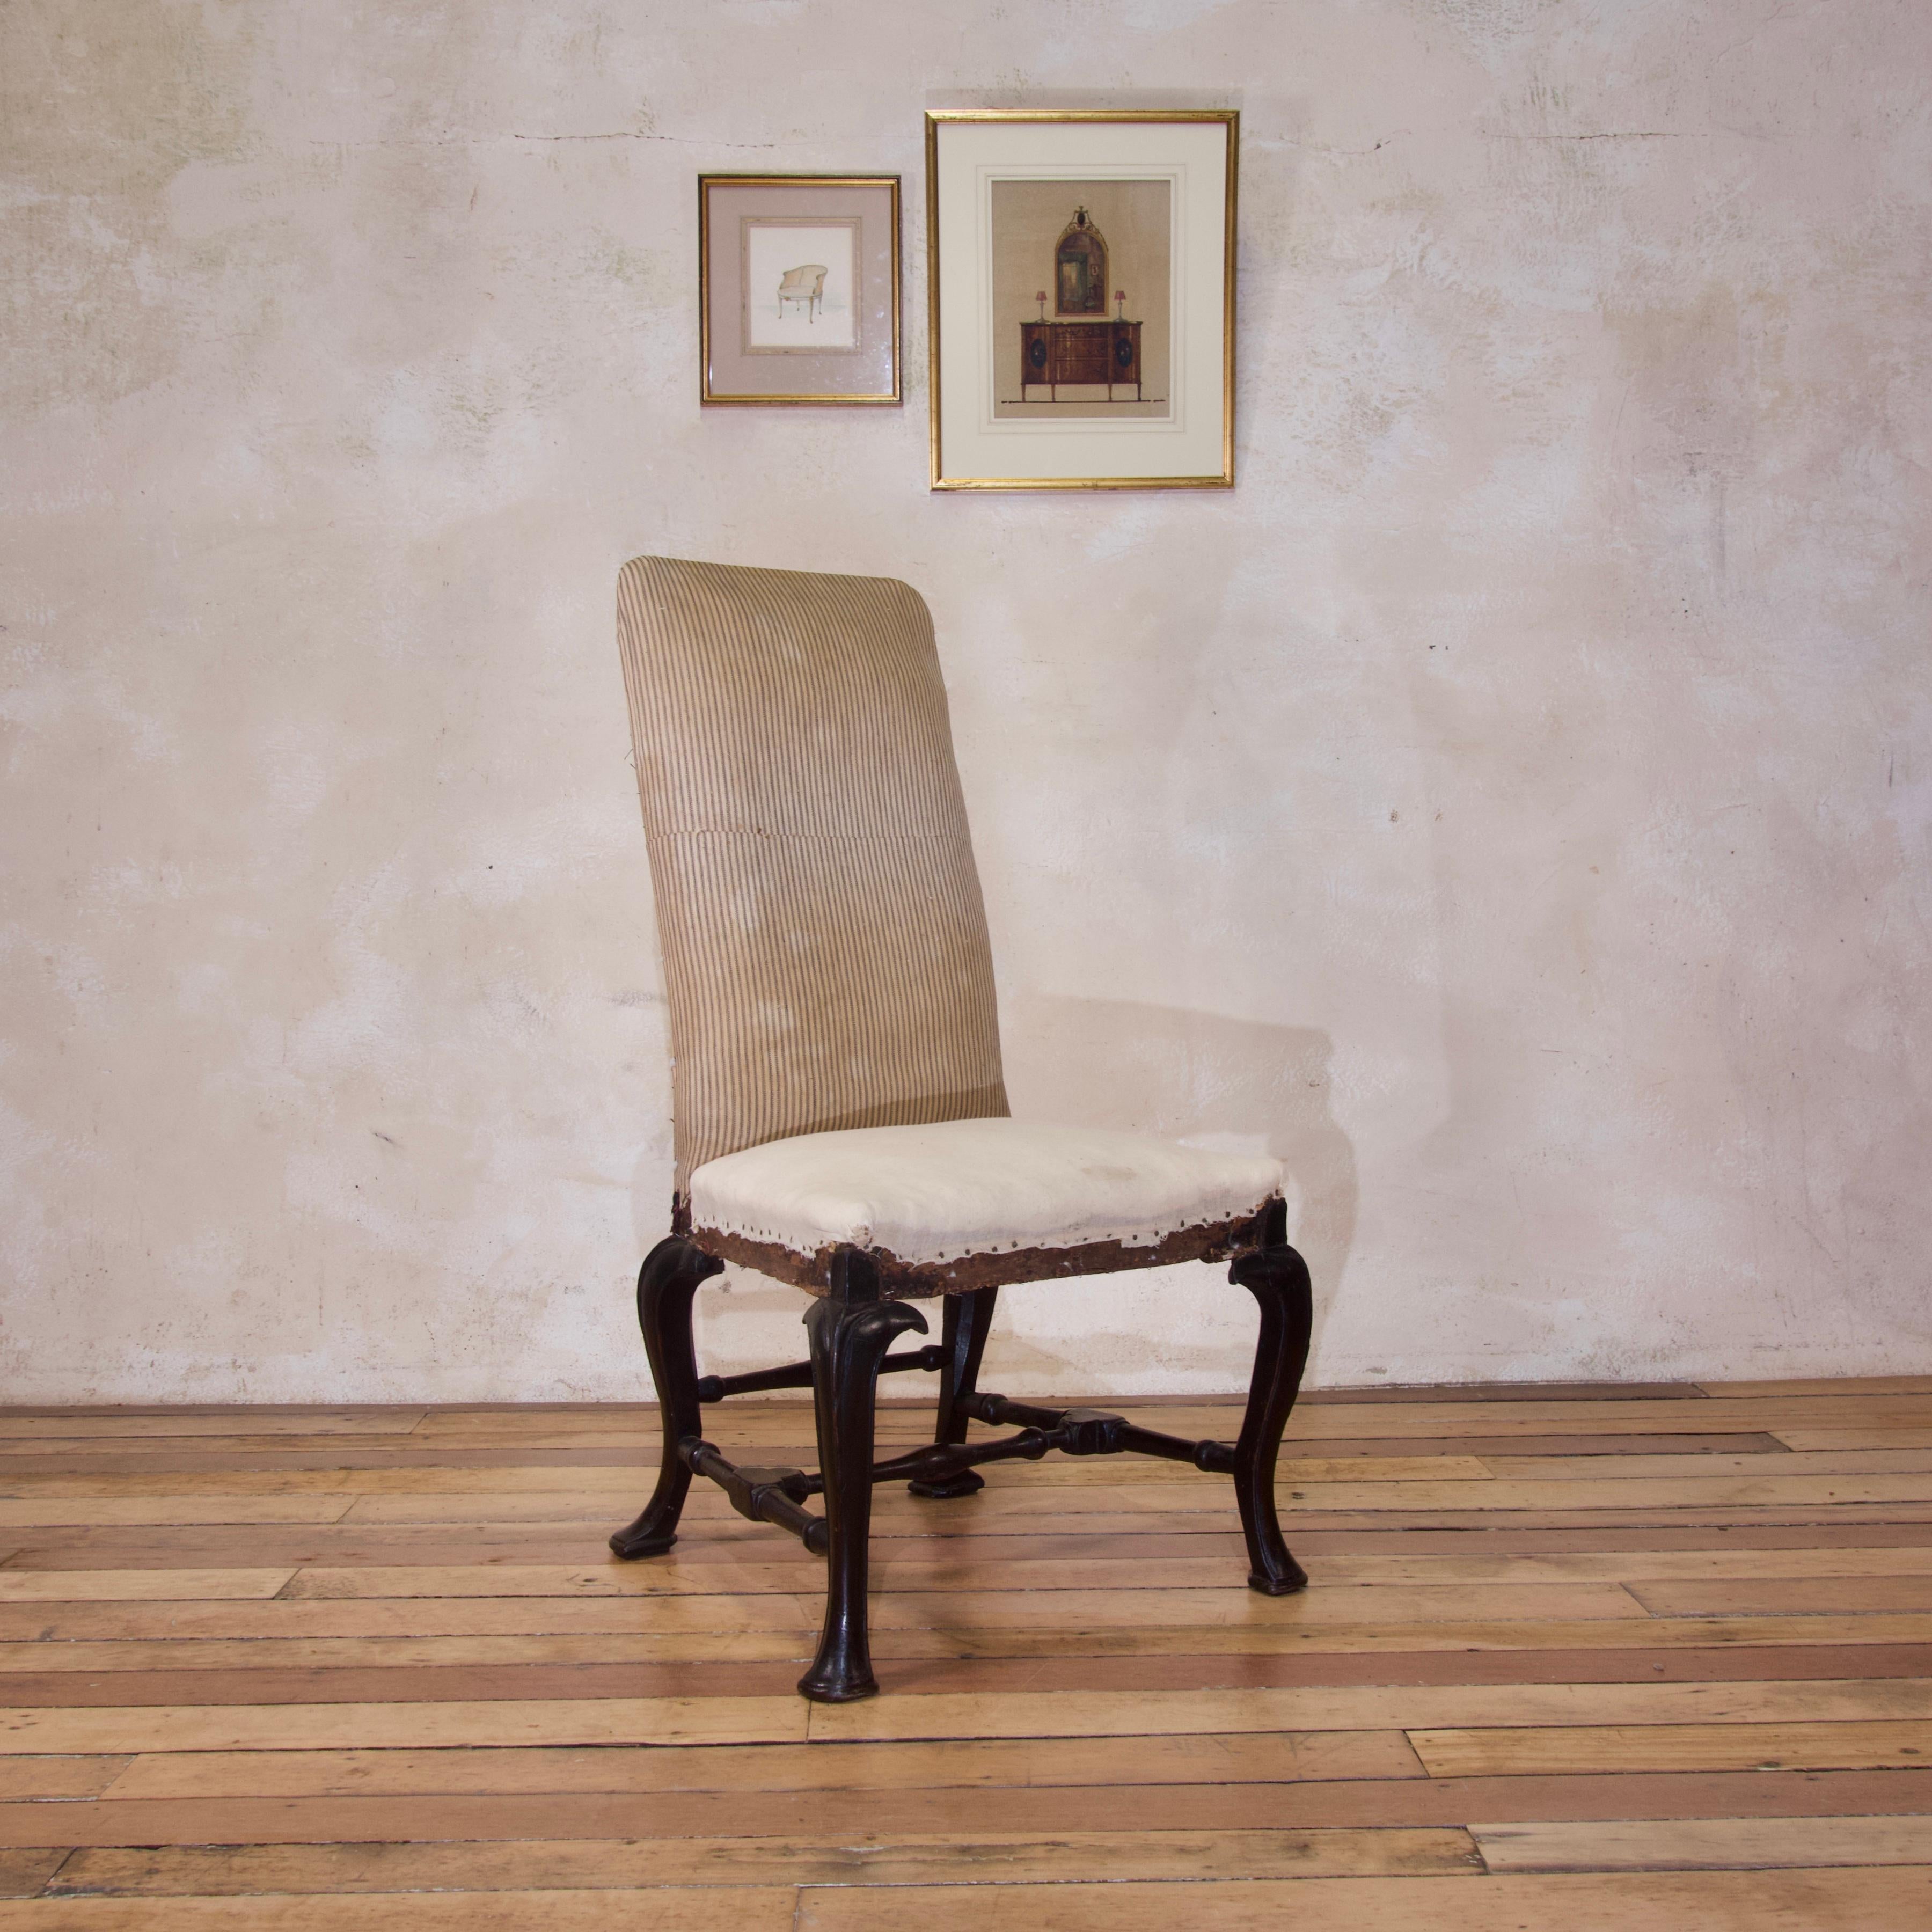 Elegant and superbly crafted, this side chair is a particularly refined expression of Queen Anne Furniture. Dating from the early 18th century, circa 1710.
Raised on an ebonised walnut base, demonstrating upholstered tapering rectangular back and